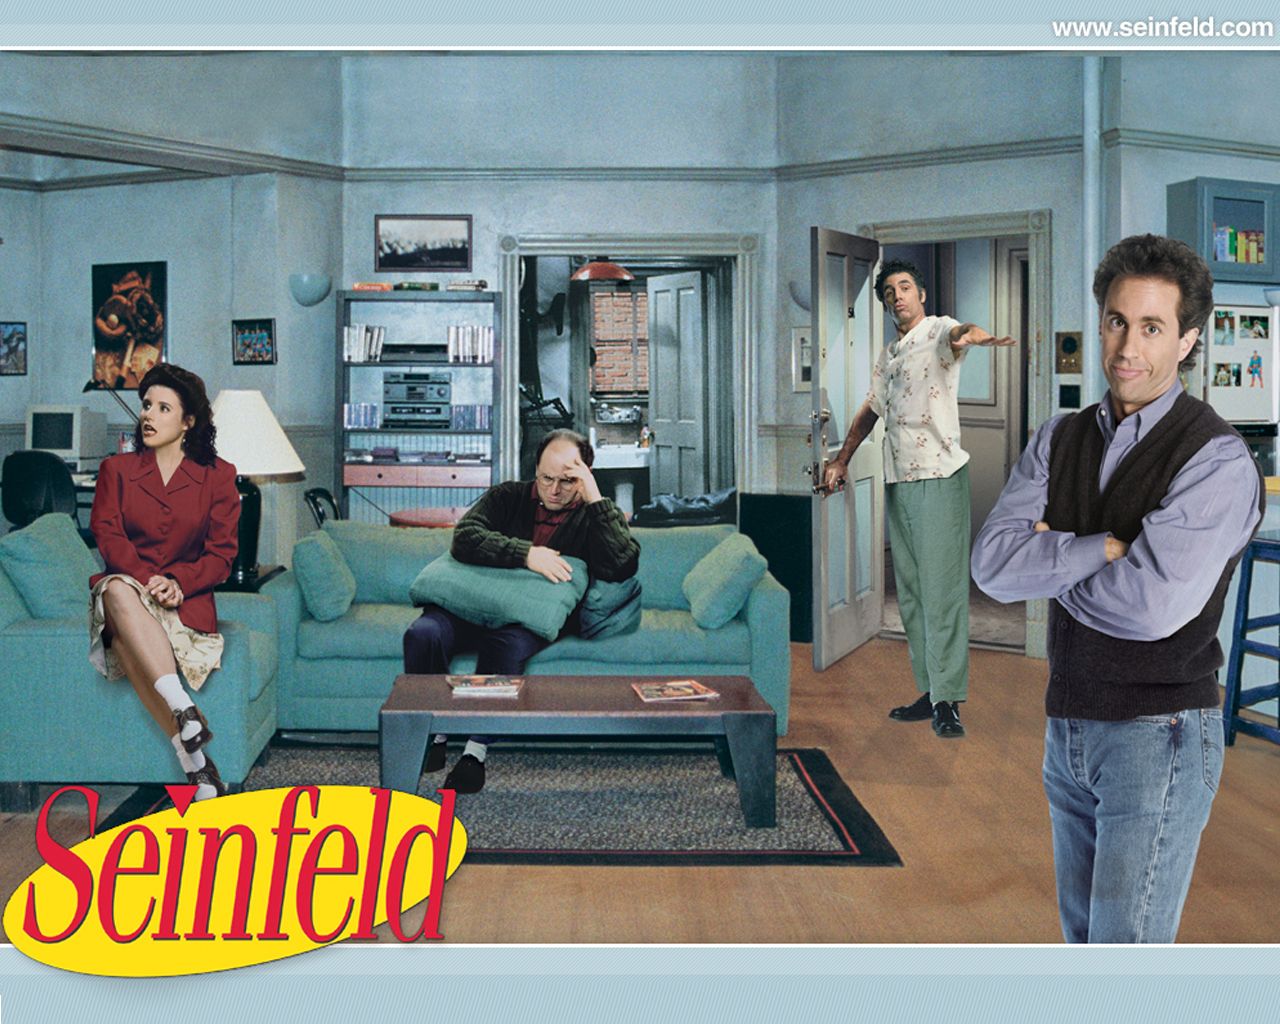 Movies Seinfeld, picture nr. 35668